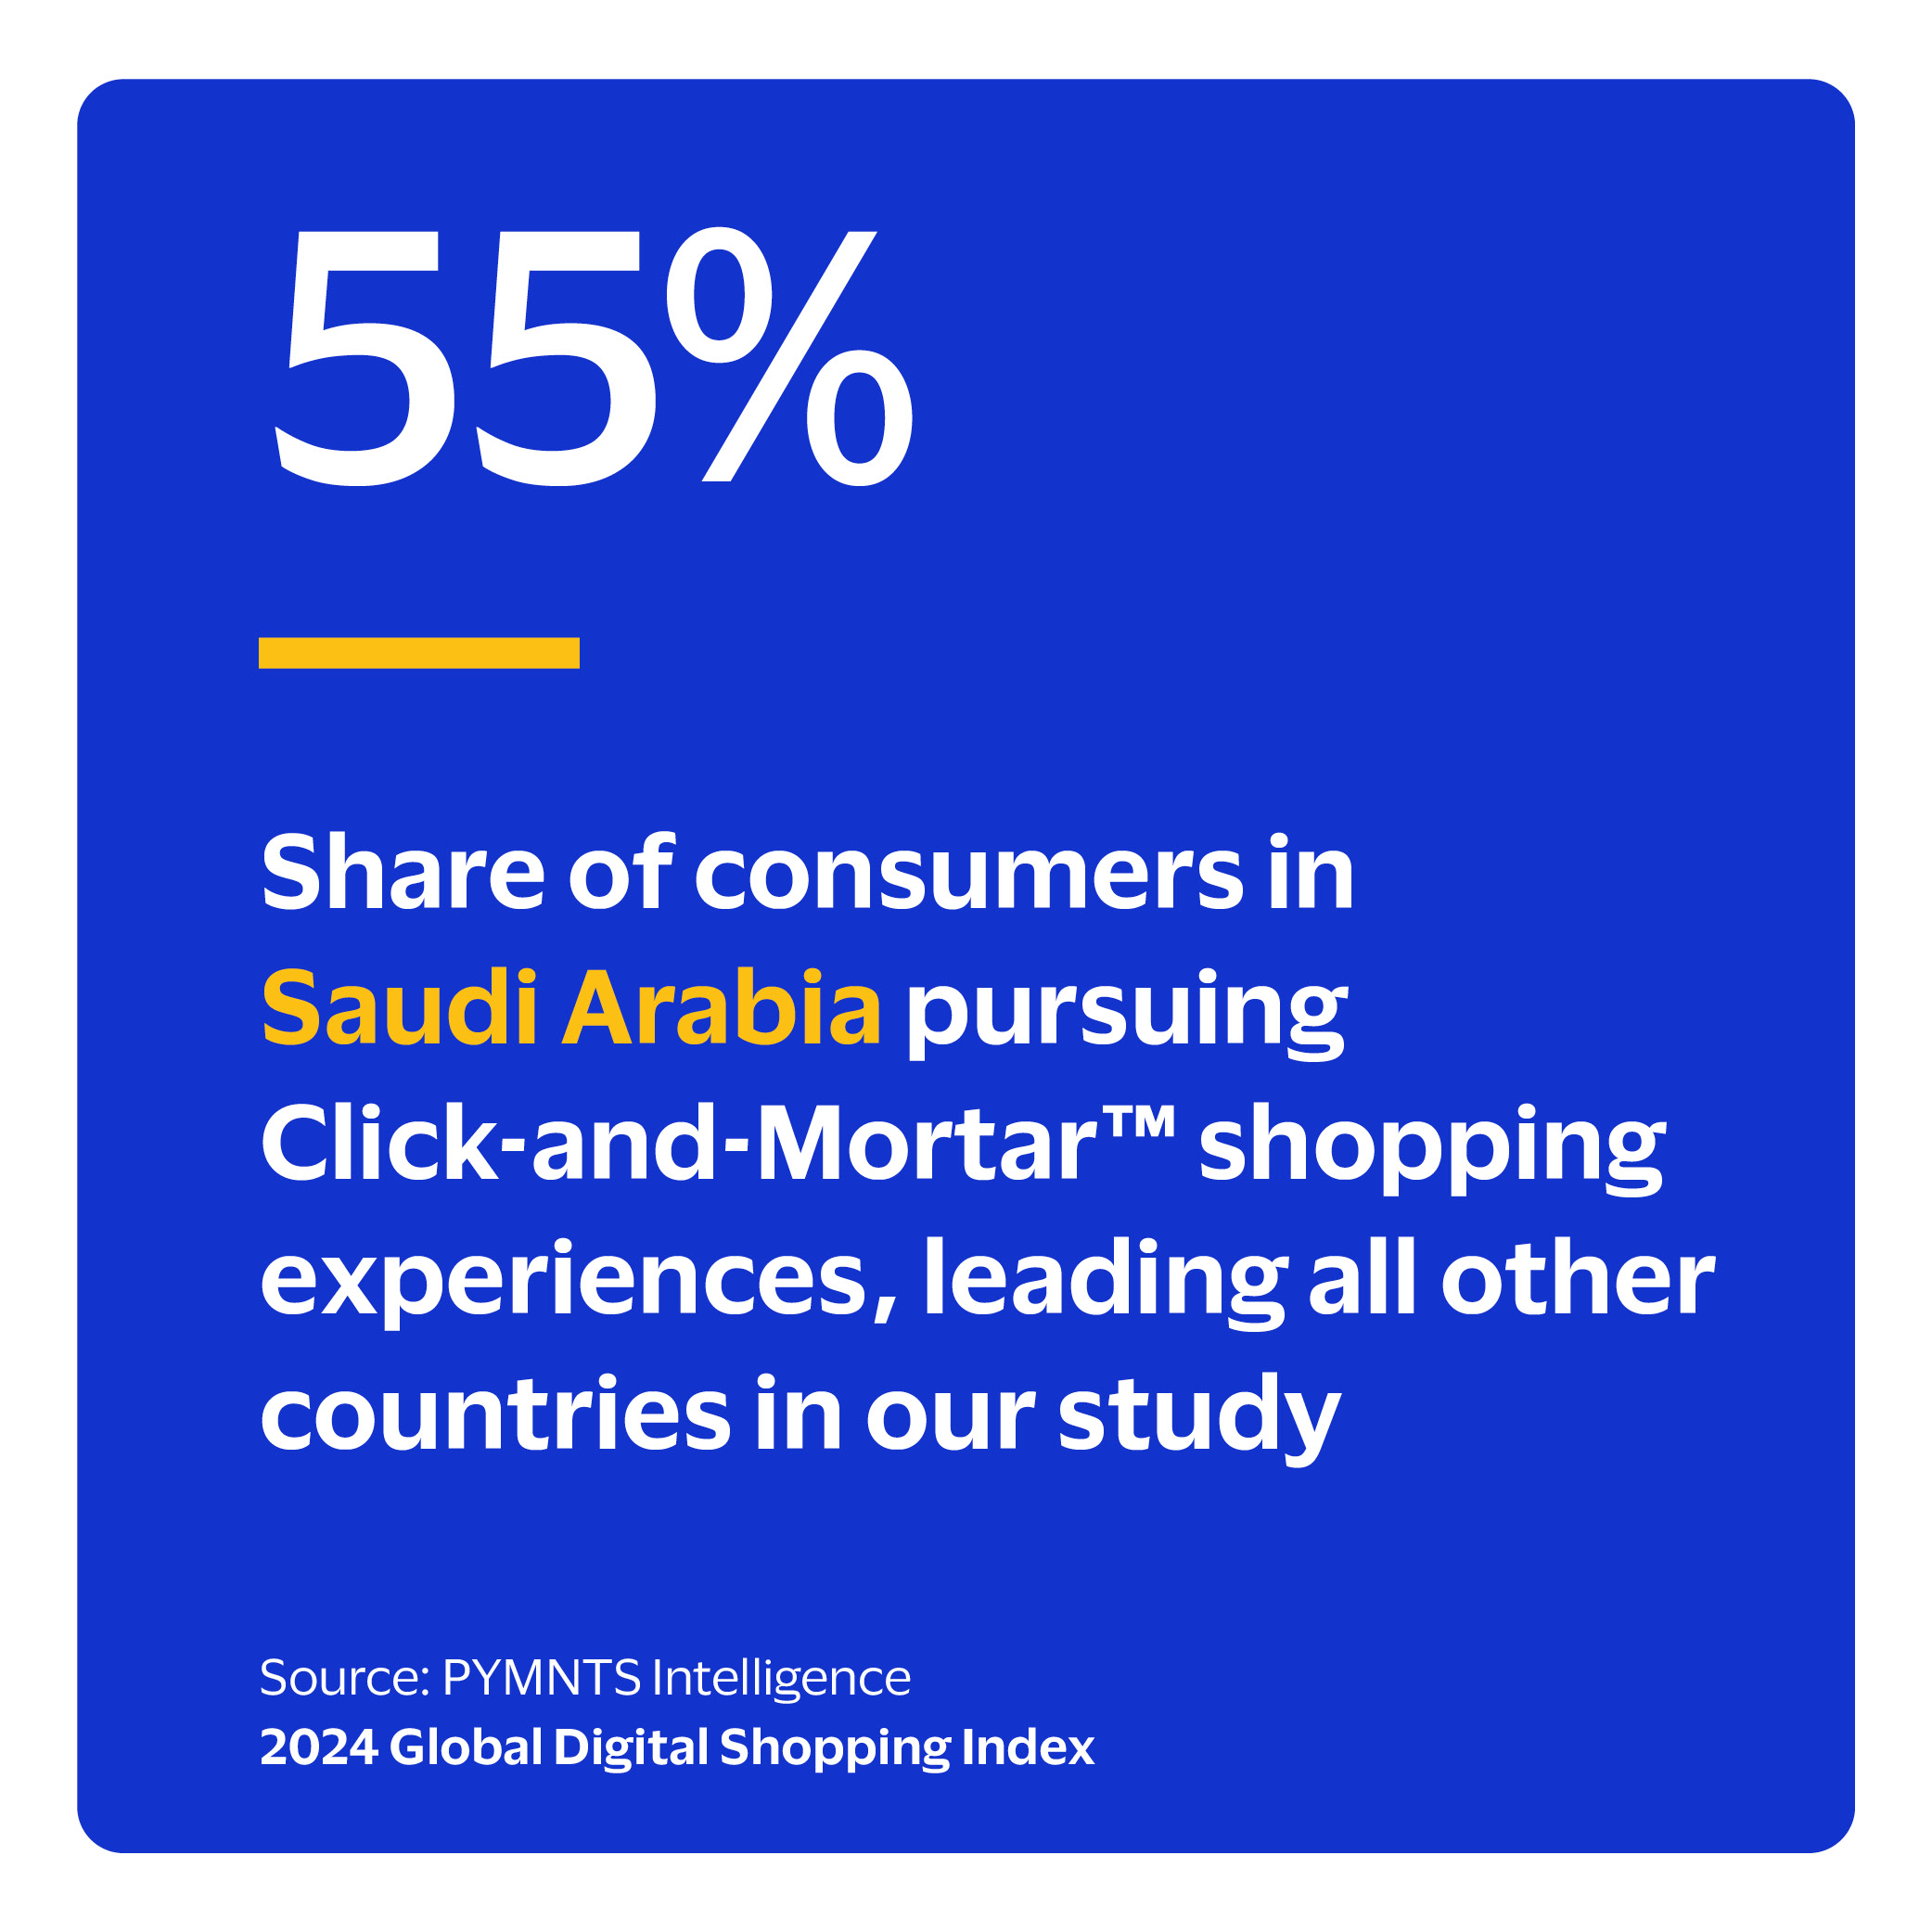 55%: Share of consumers in Saudi Arabia pursuing Click-and-Mortar™ shopping experiences, leading all other countries in our study